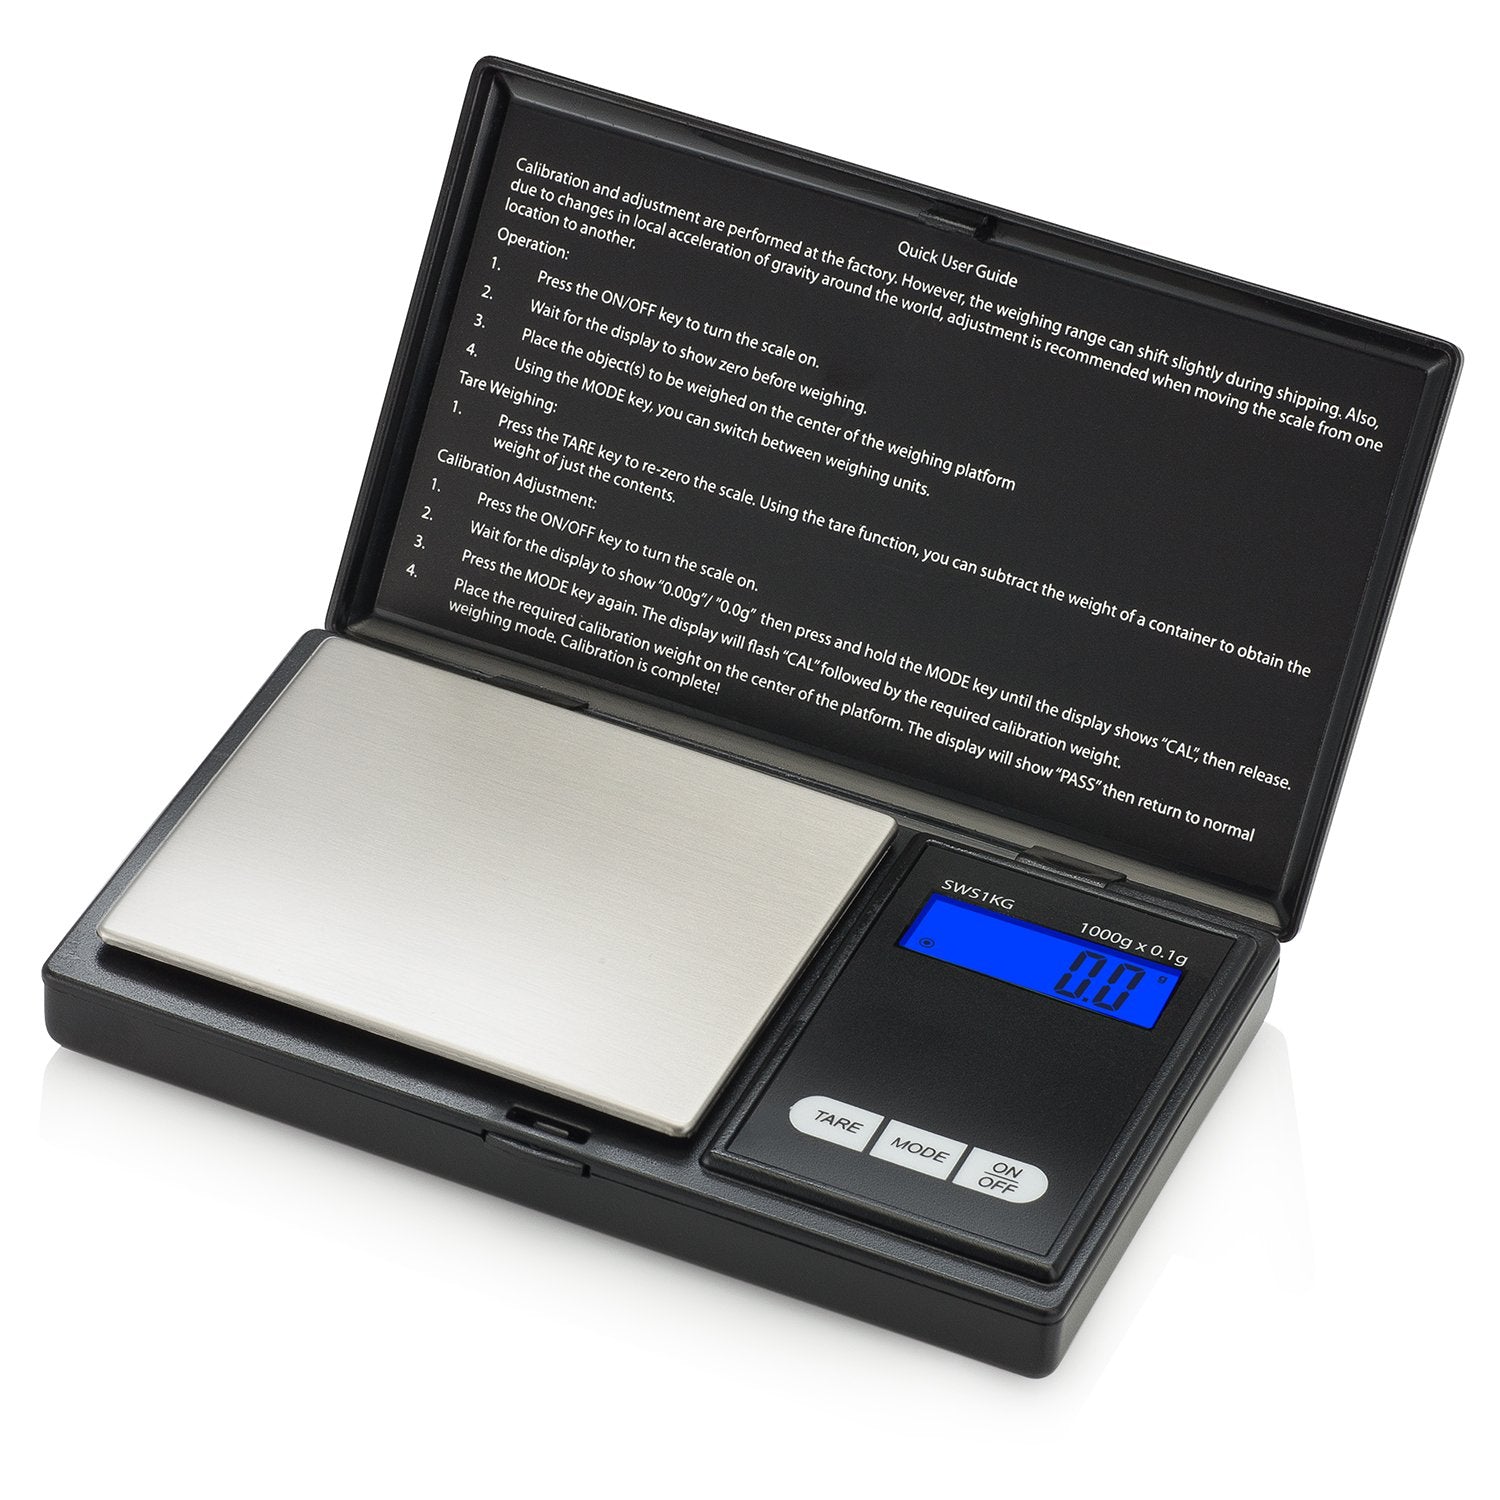 Smart Weigh Digital Pocket Gram Scale, Small Letter Gram Scale, Jewelry Scale, Food Scale, Medicine Scale, Kitchen Scale Black, Battery Included  - Very Good